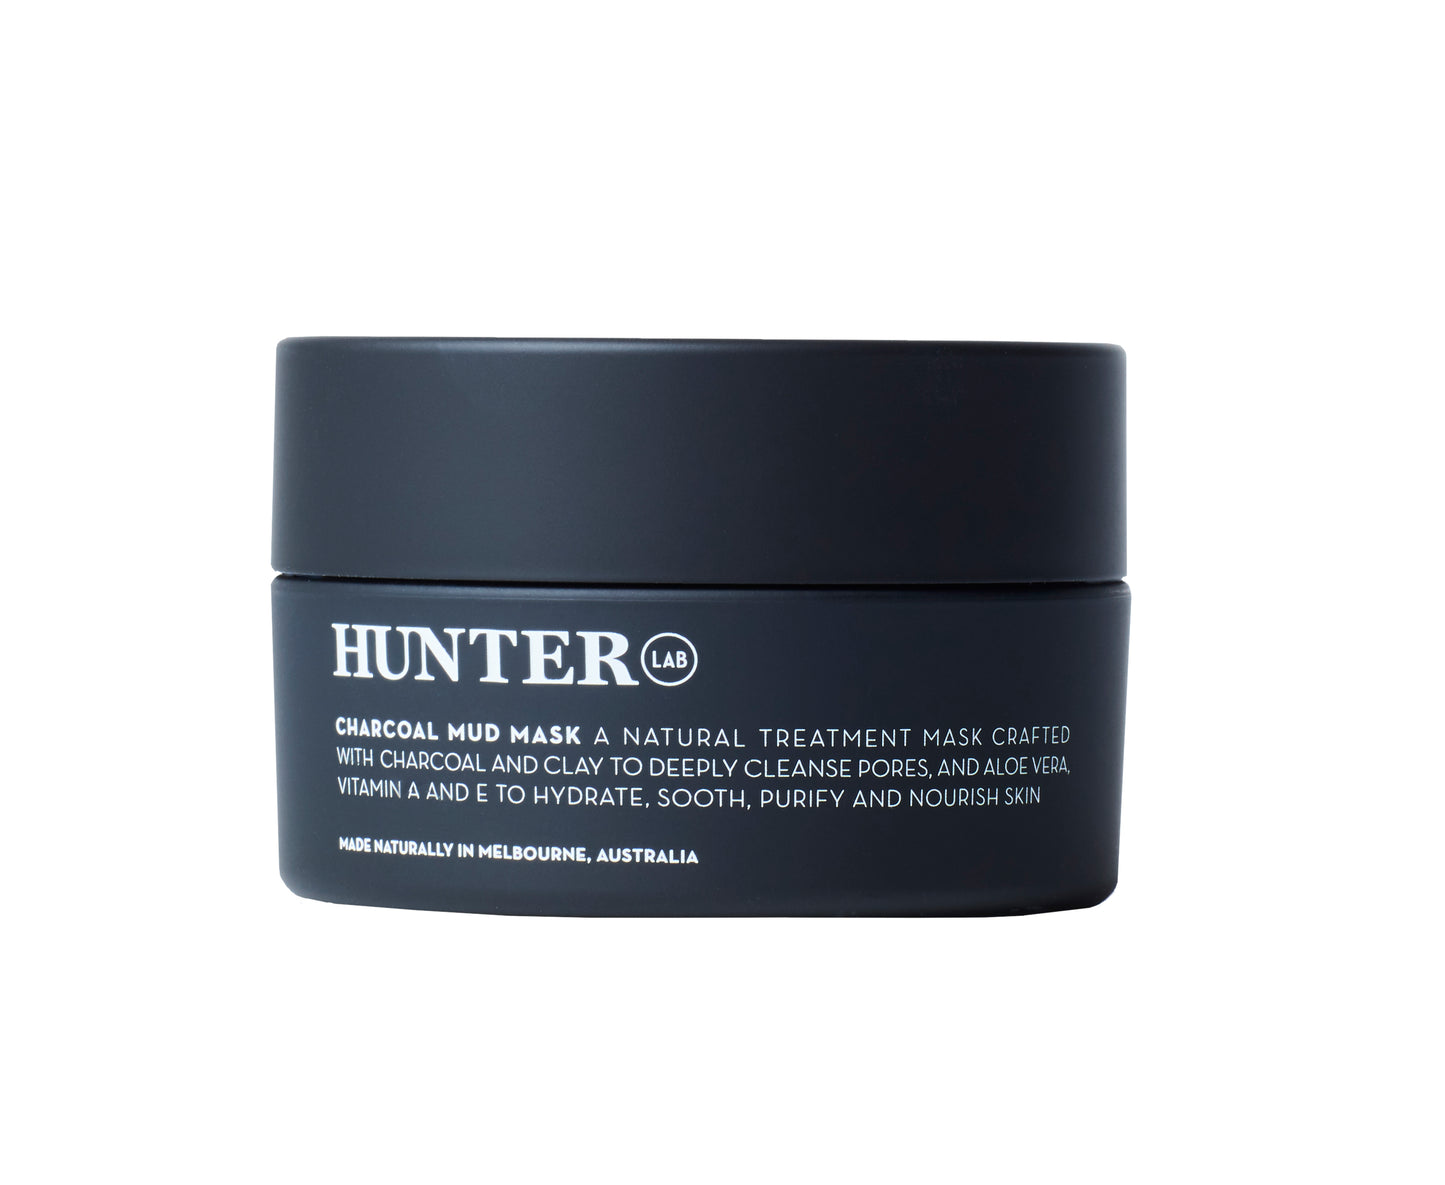 Charcoal Mud Mask | 65g A natural high performance treatment mask crafted with Charcoal and Bentonite and Kaoline Clay to deeply cleanse pores and remove impurities, and Aloe Vera, Vitamin A and E to hydrate, sooth and nourish skin.